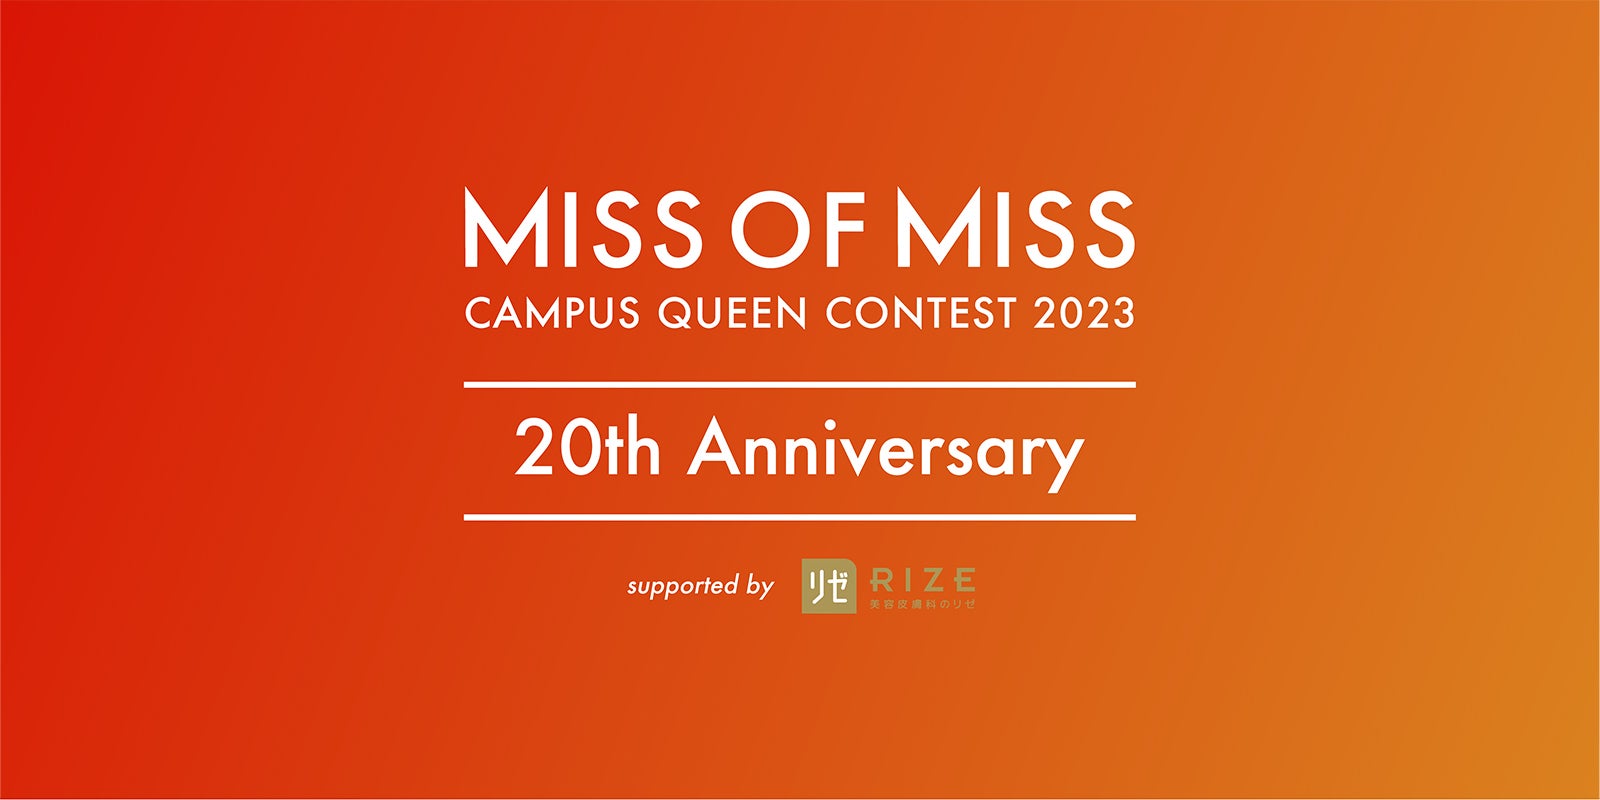 「MISS OF MISS CAMPUS QUEEN CONTEST 2023」ロゴ （提供写真） 